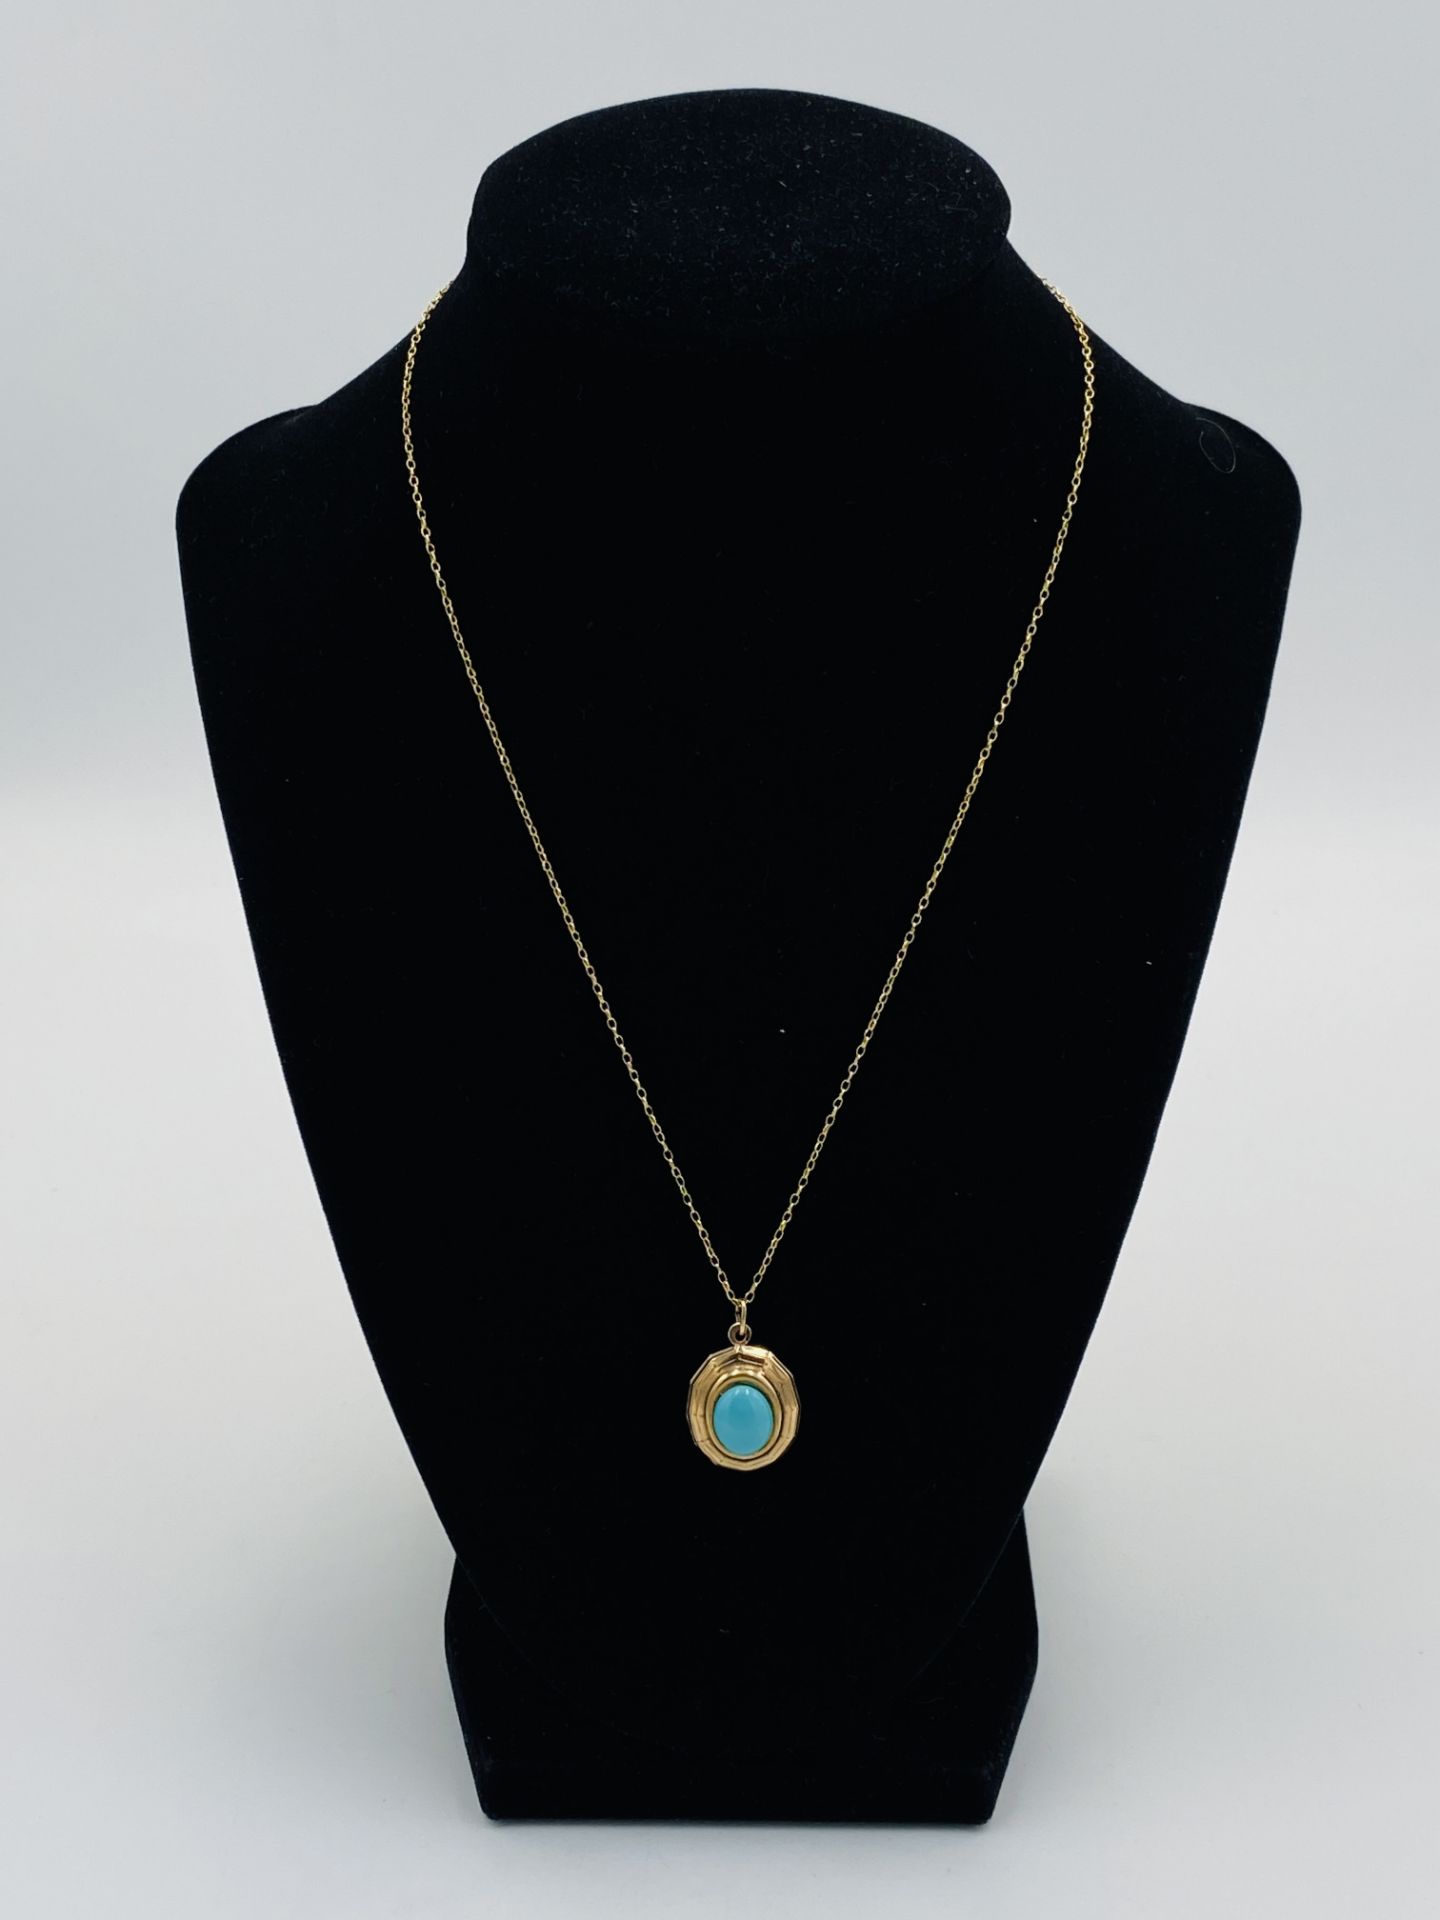 9ct gold necklace with turquoise stone pendant - Image 2 of 4